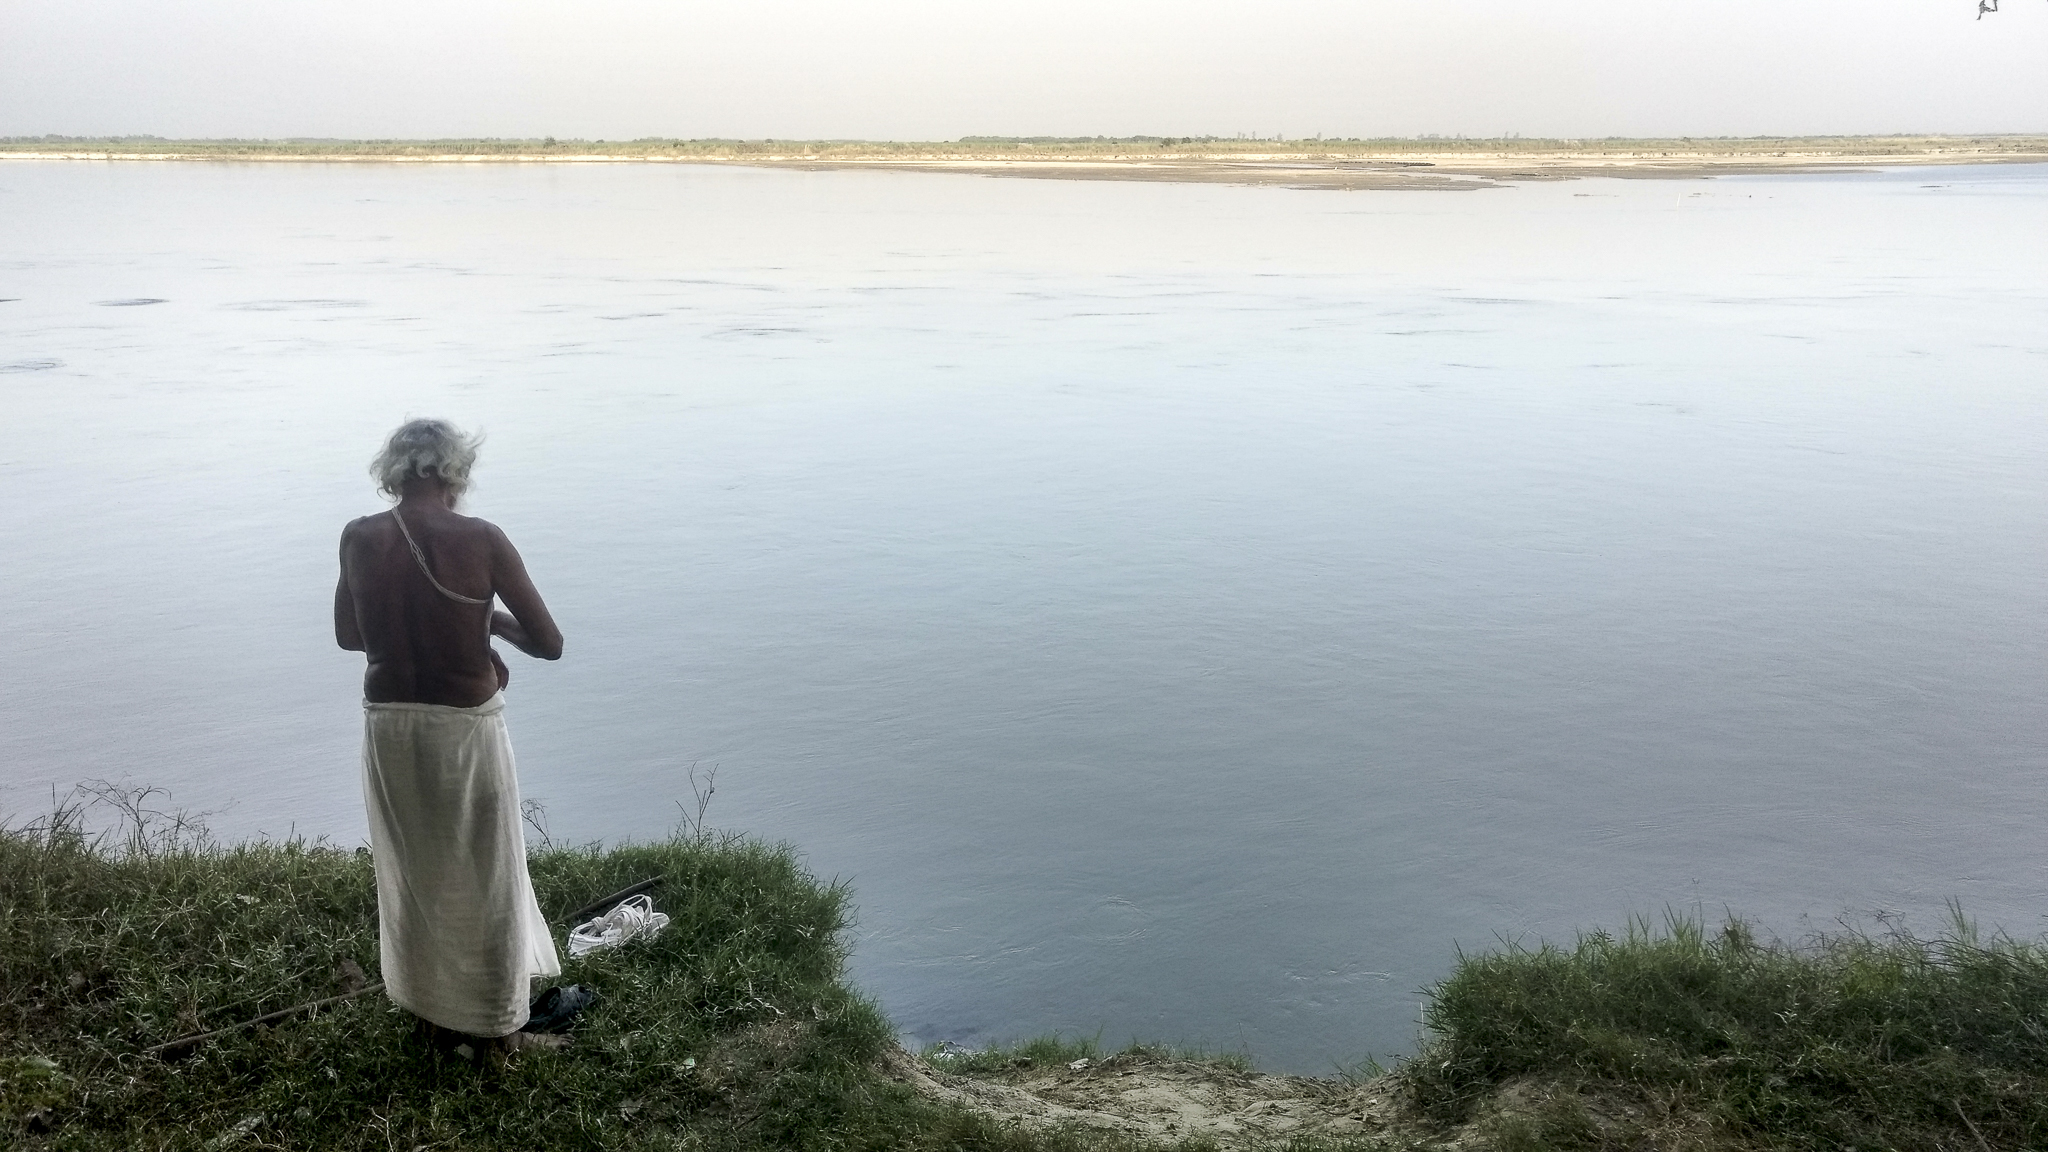 The Ganges and its people